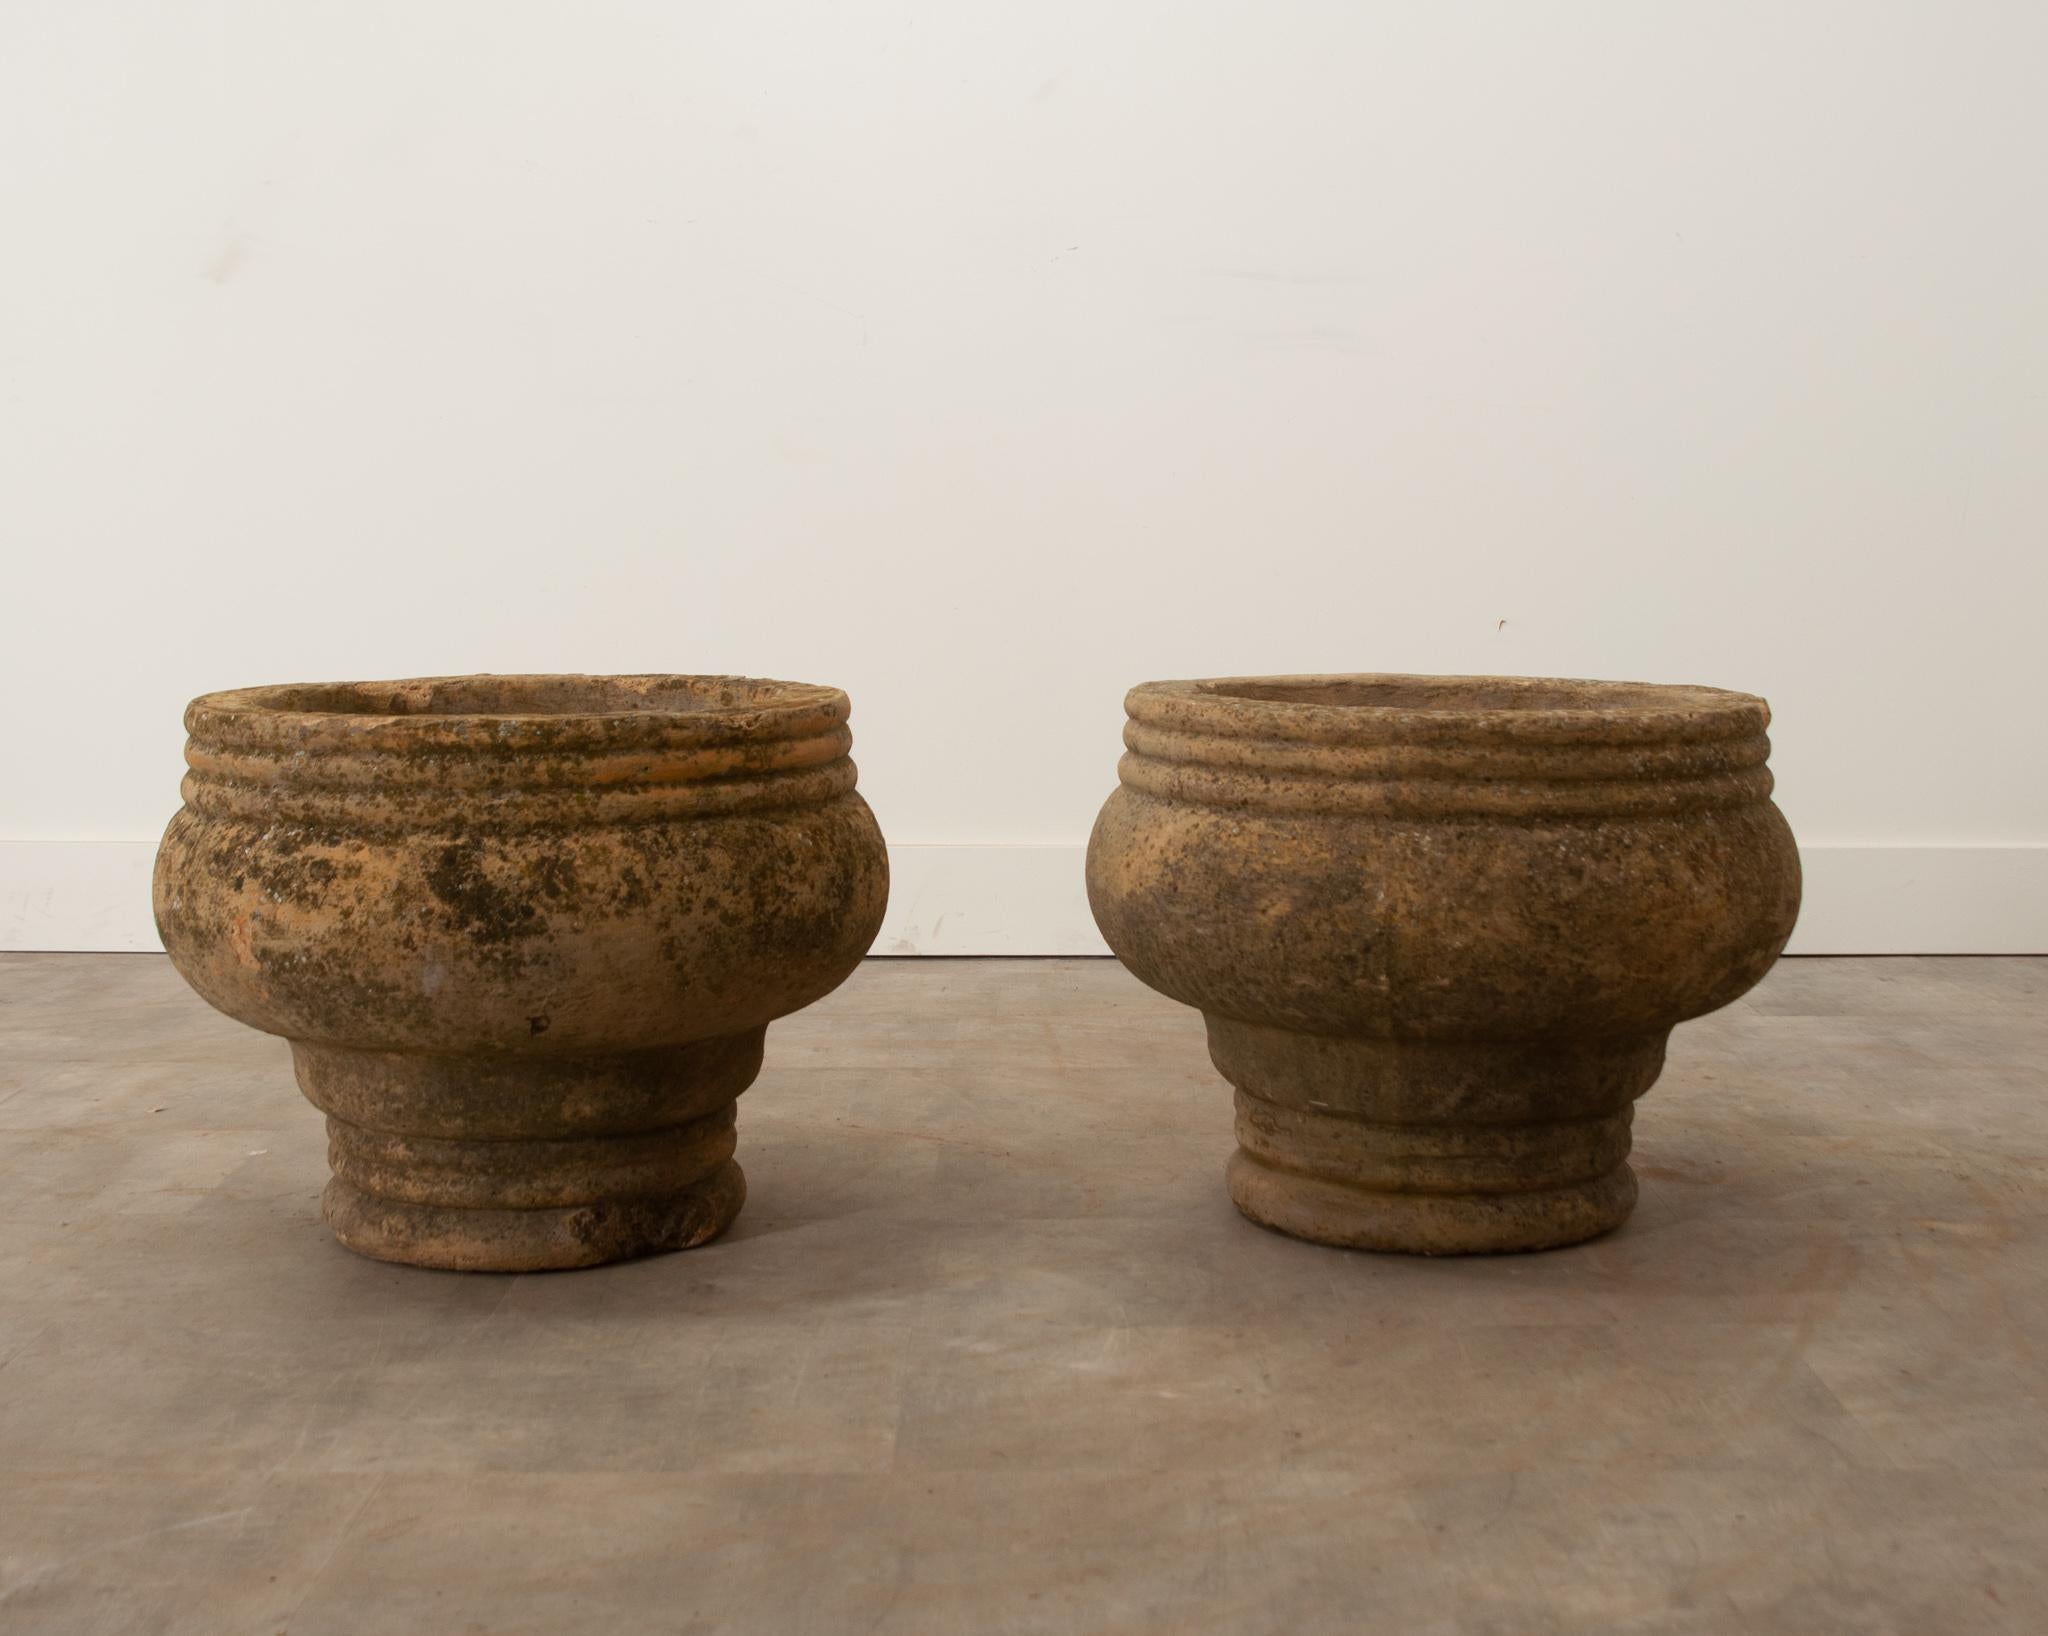 A handsome pair of heavy terracotta planters from 19th century England. Decades of weather exposure have given them a fascinating patina and variation in color. Holes for avoiding water collection are present. The interior measures 16” diameter and